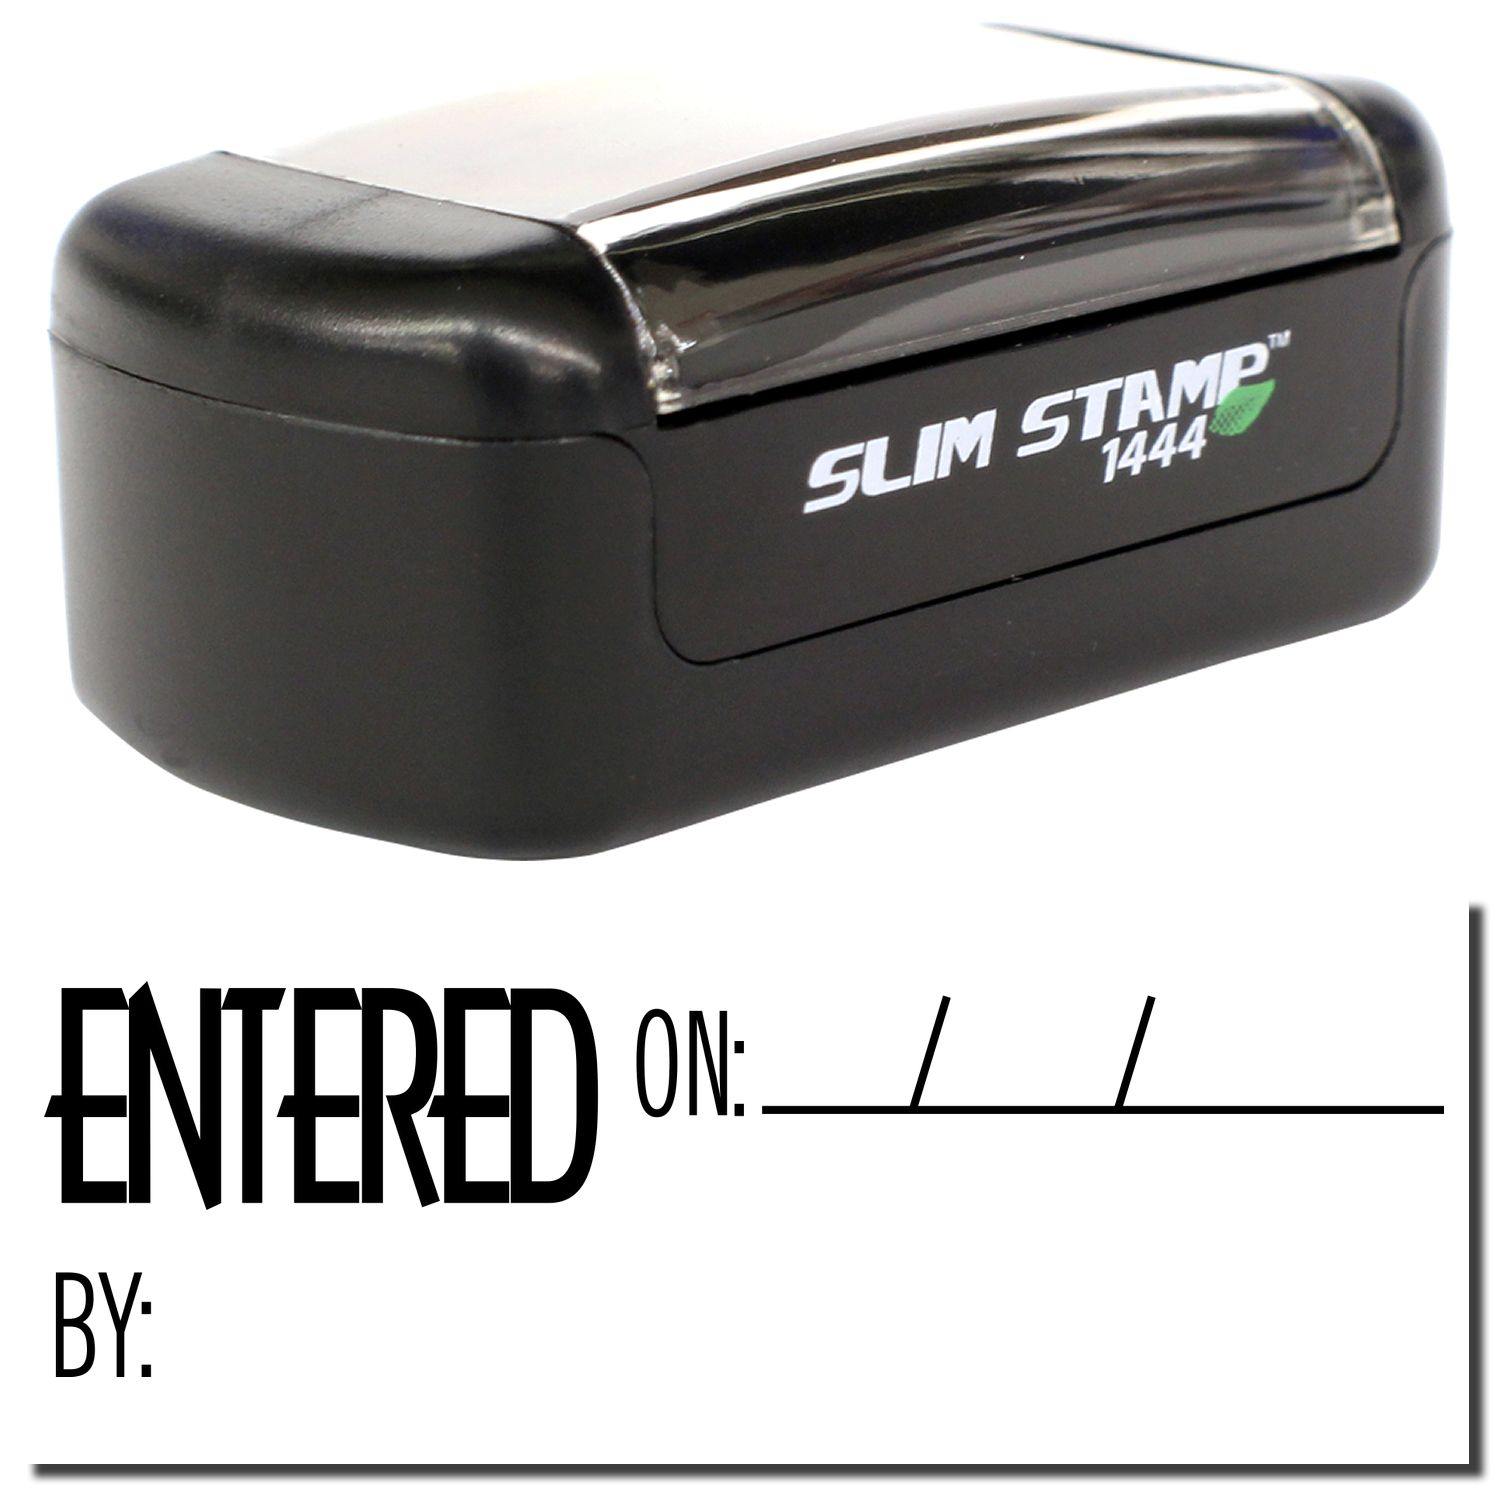 A stock office pre-inked stamp with a stamped image showing how the text "ENTERED ON" with a space for the date and the name of the person is displayed after stamping.